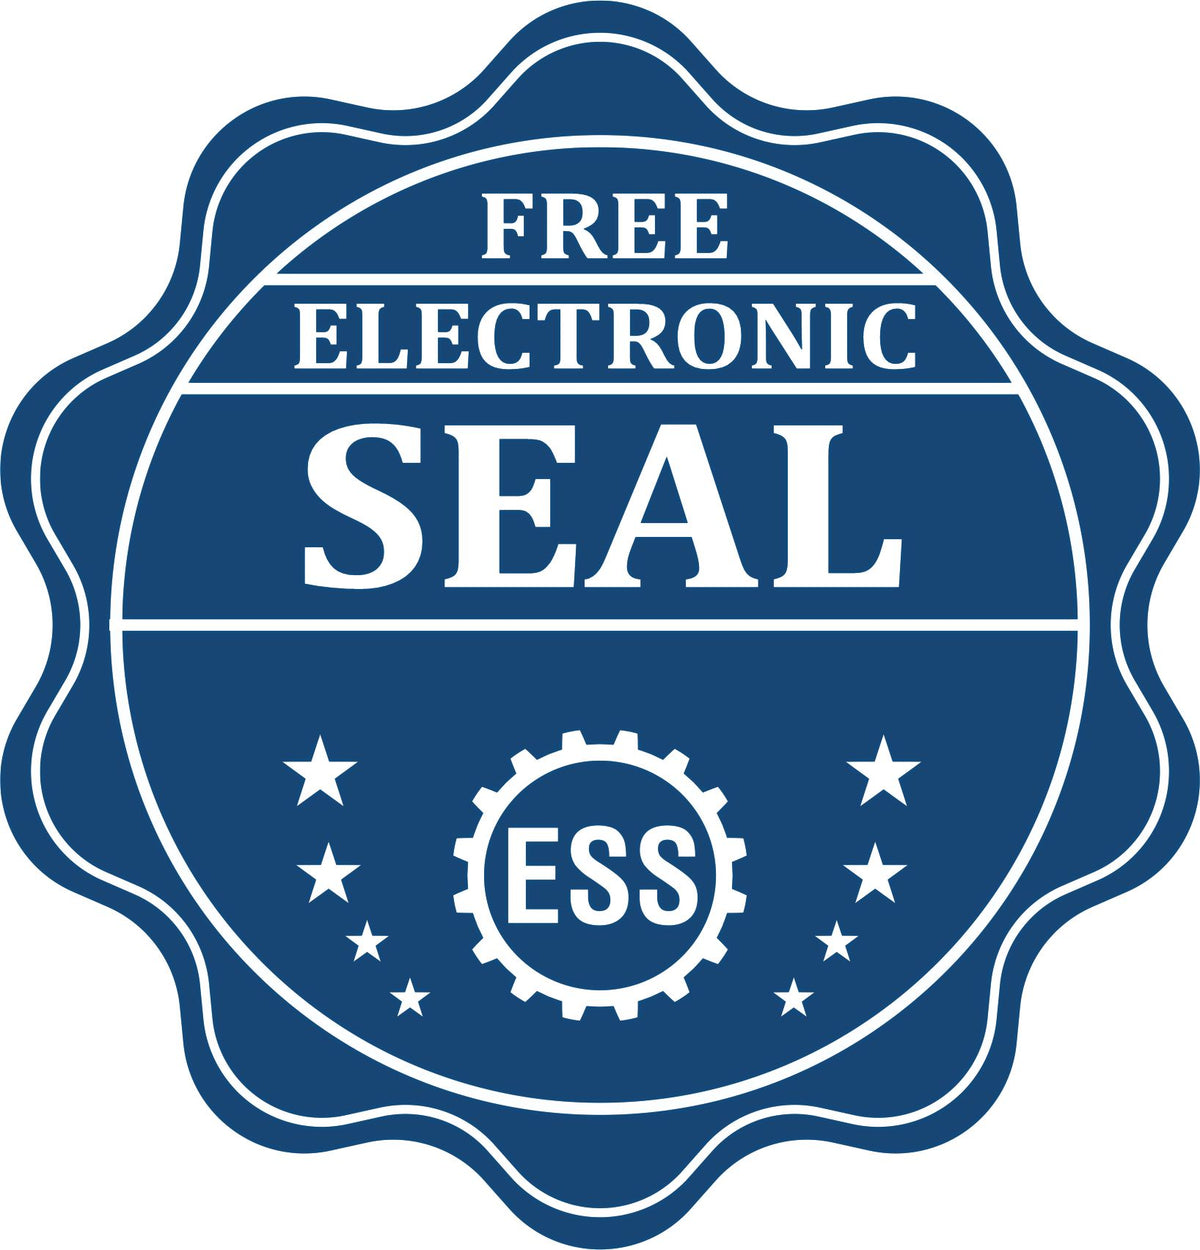 A badge showing a free electronic seal for the Gift Minnesota Architect Seal with stars and the ESS gear on the emblem.